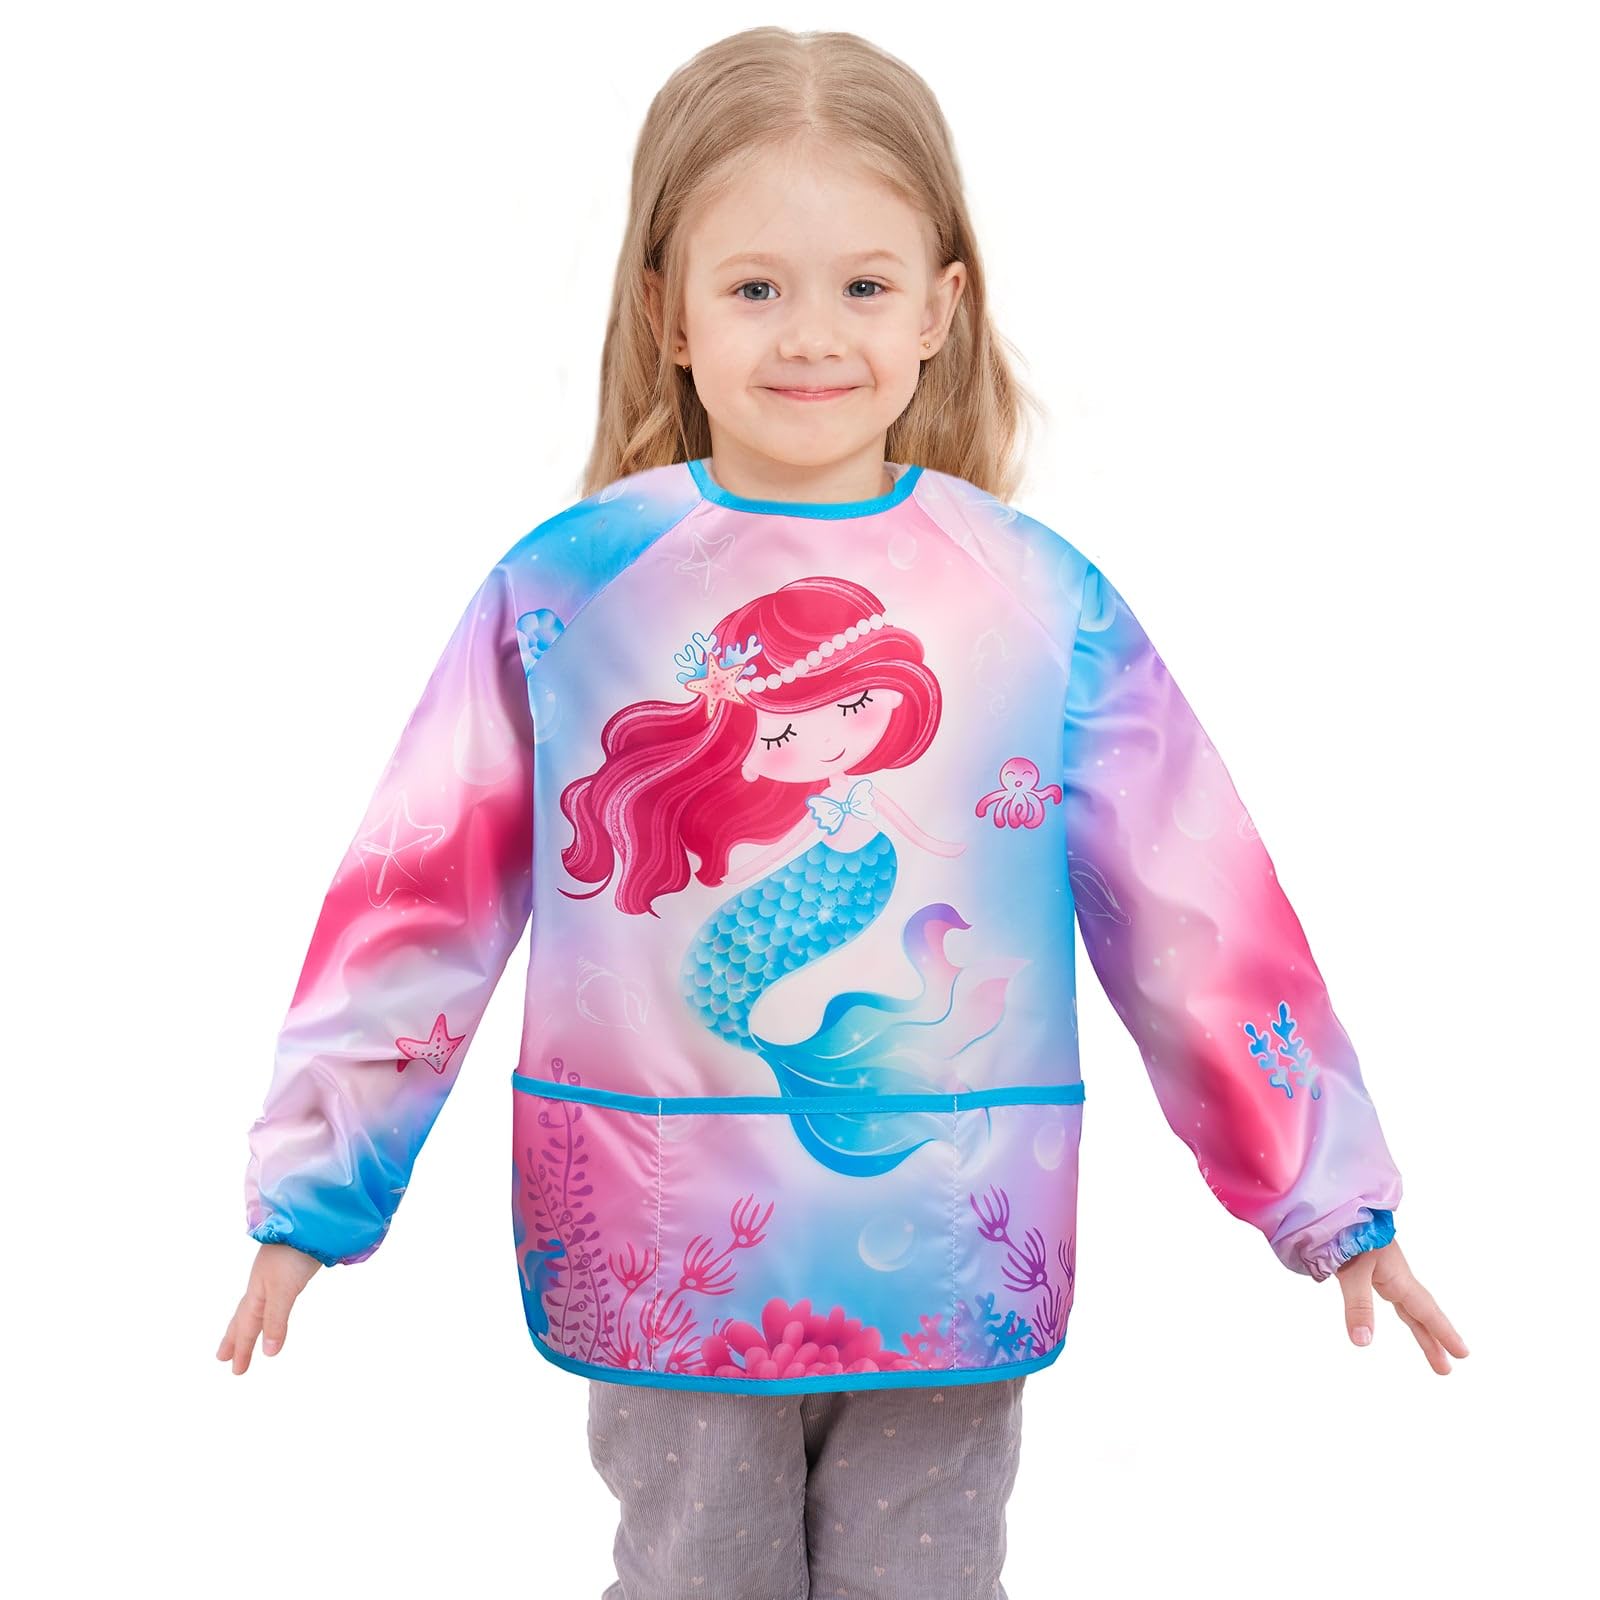 WERNNSAI Art Smock - Kids Aprons for Girls Waterproof Toddler Art Smock Painting for Girls with Long Sleeve and 3 Pockets